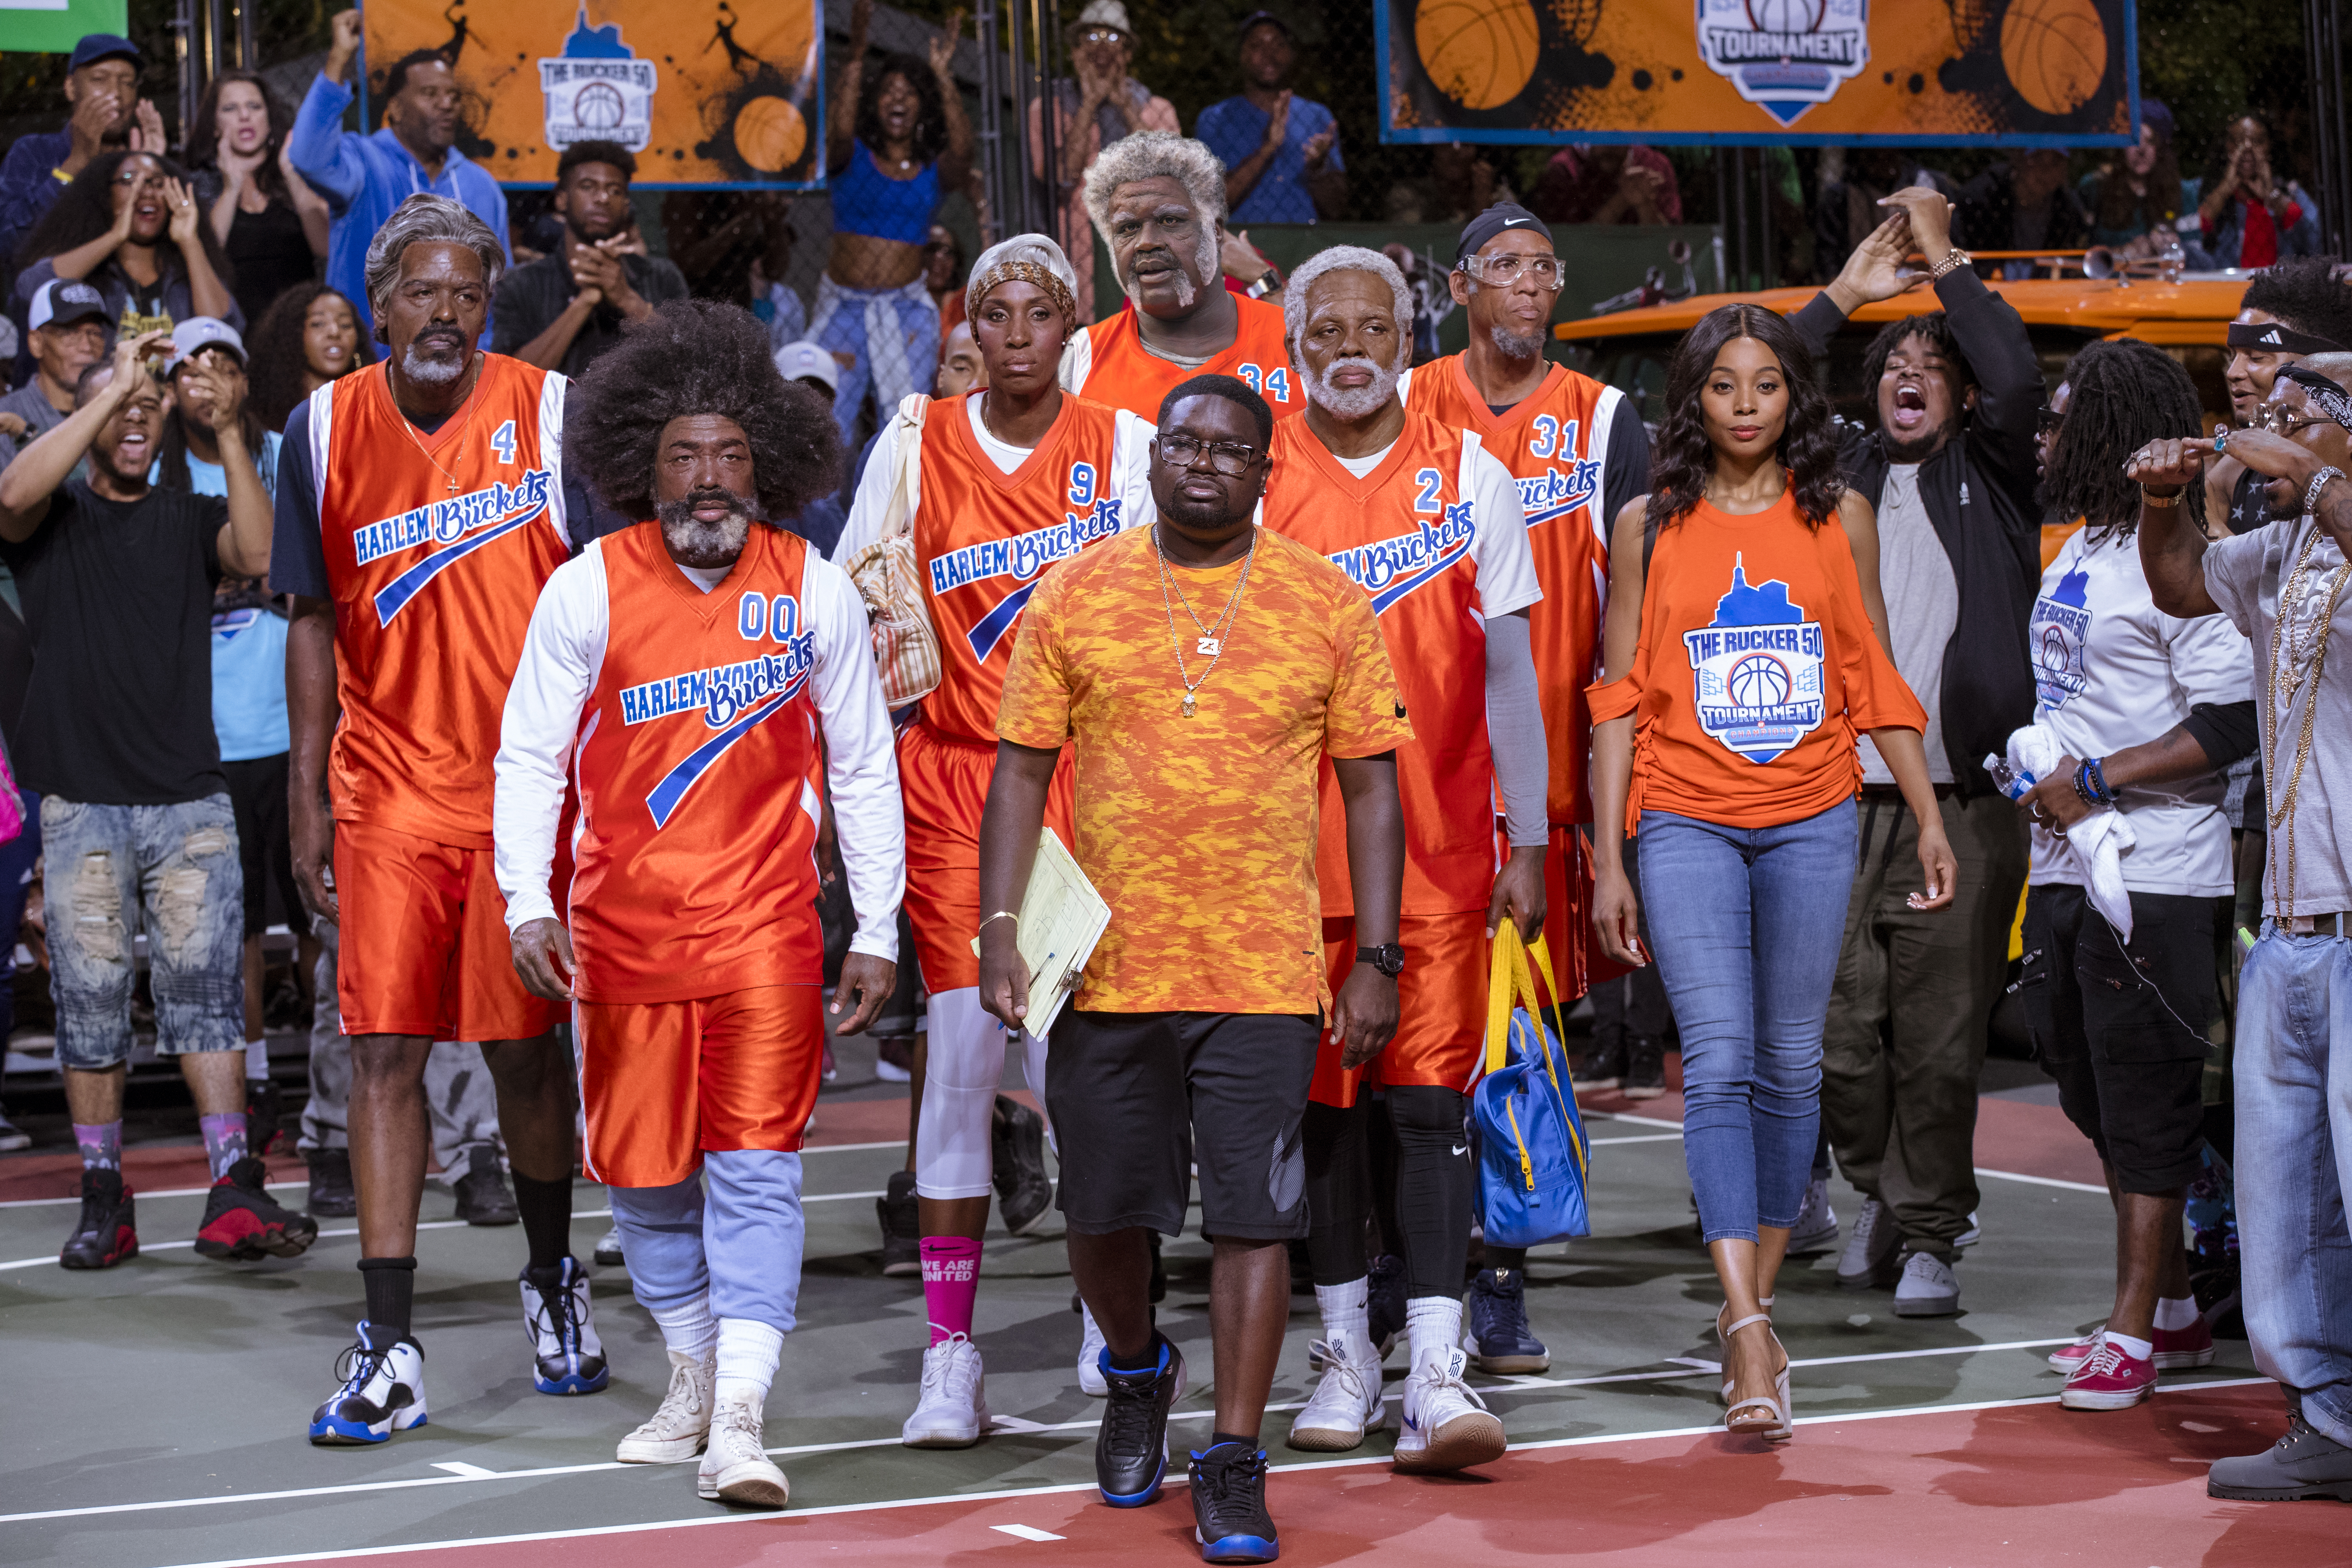  From L to R: From L to R: Chris Webber as &ldquo;Preacher,&rdquo; Nate Robinson as &ldquo;Boots,&rdquo; Lisa Leslie as &ldquo;Betty Lou,&rdquo; Shaquille O&rsquo;Neal as &ldquo;Big Fella,&rdquo; Lil Rel Howery as &ldquo;Dax,&rdquo; Kyrie Irving as &ldquo;Uncle Drew,&rdquo; Reggie Miller as &ldquo;Lights,&rdquo; and Erica Ash as &ldquo;Maya&rdquo; in UNCLE DREW. Photo by Quantrell Colbert. 